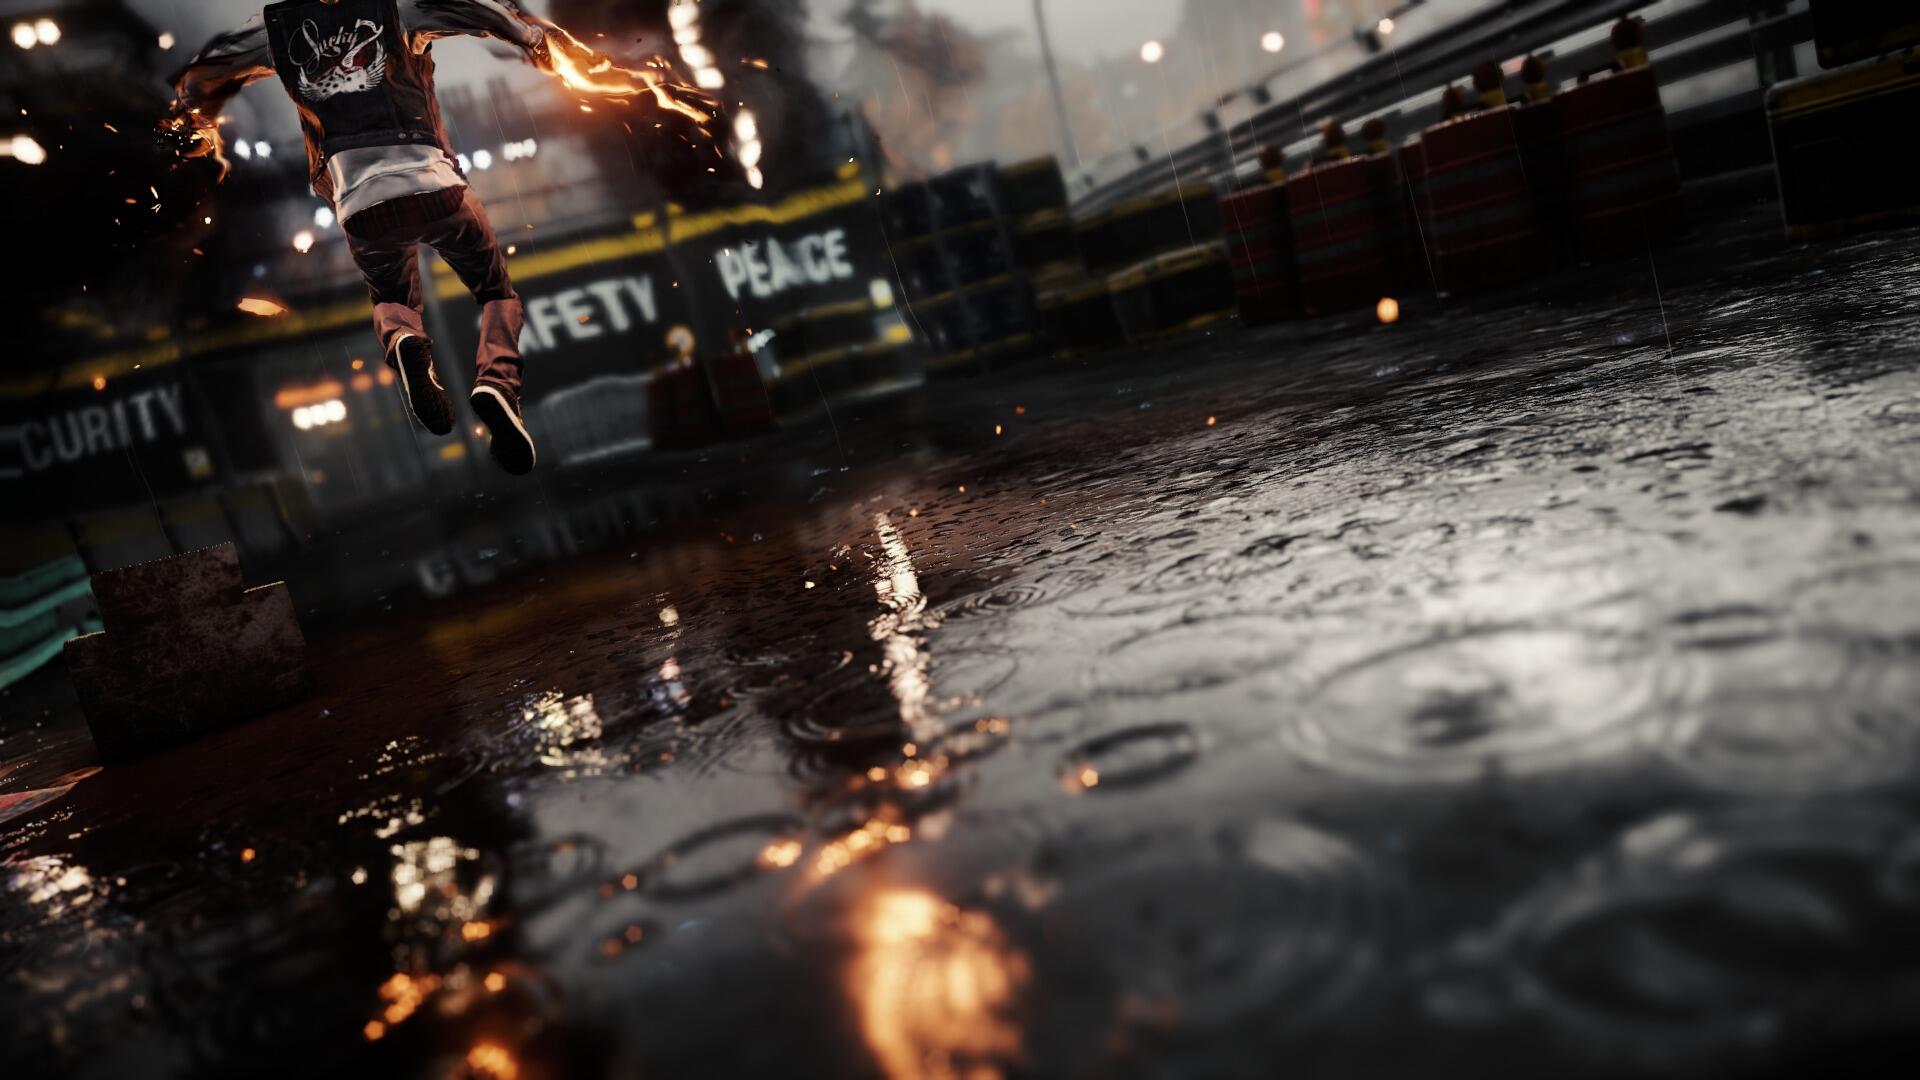 Infamous second son hd wallpapers pictures images